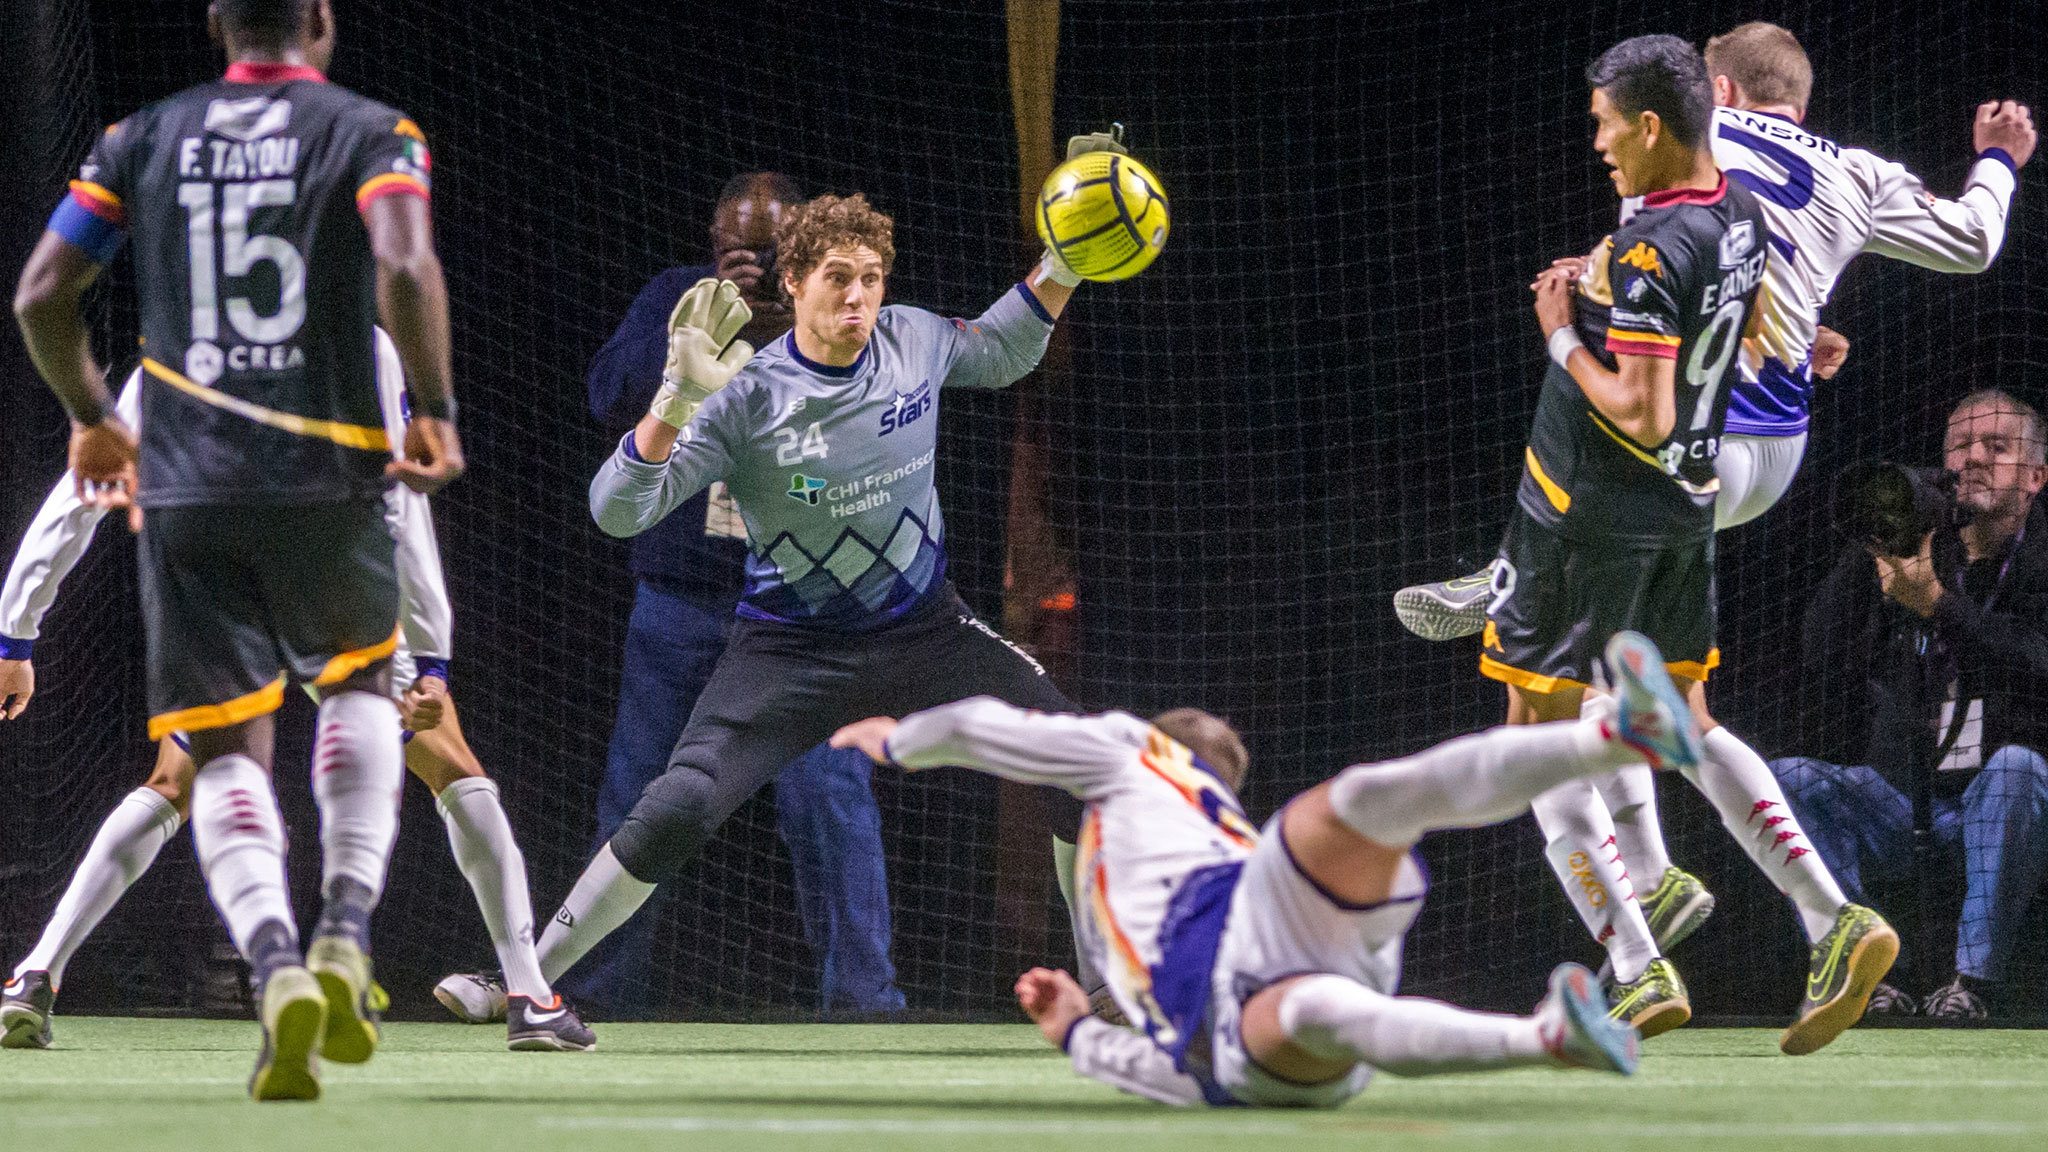 Danny Waltman has shined in goal for the Stars, posting 48 saves during three wins in November. COURTESY PHOTO, Wilson Tsoi/Tacoma Stars